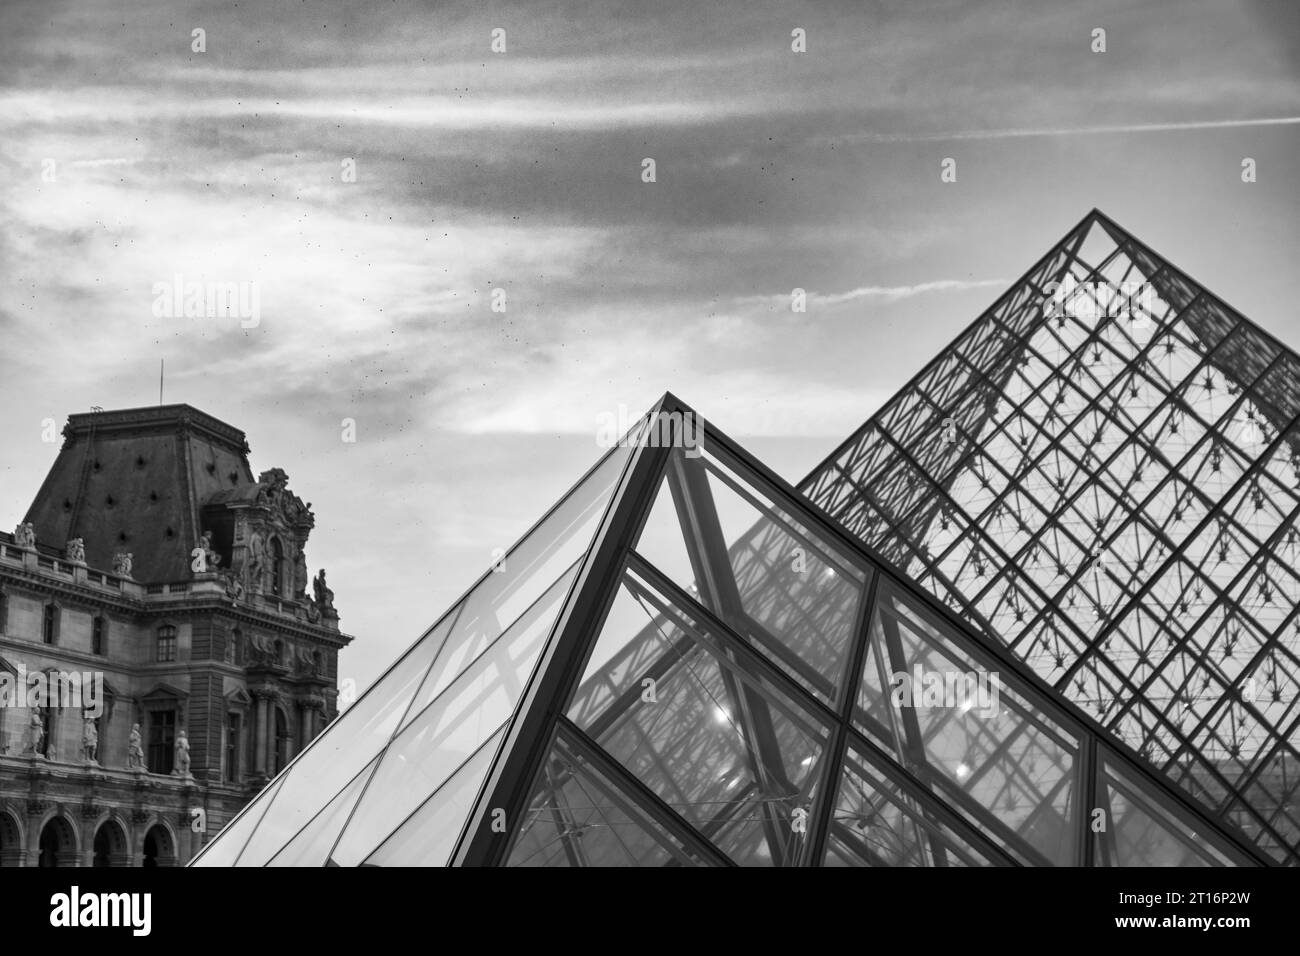 Courtyard and glass pyramid of the Louvre Museum at dusk, Paris, France Stock Photo